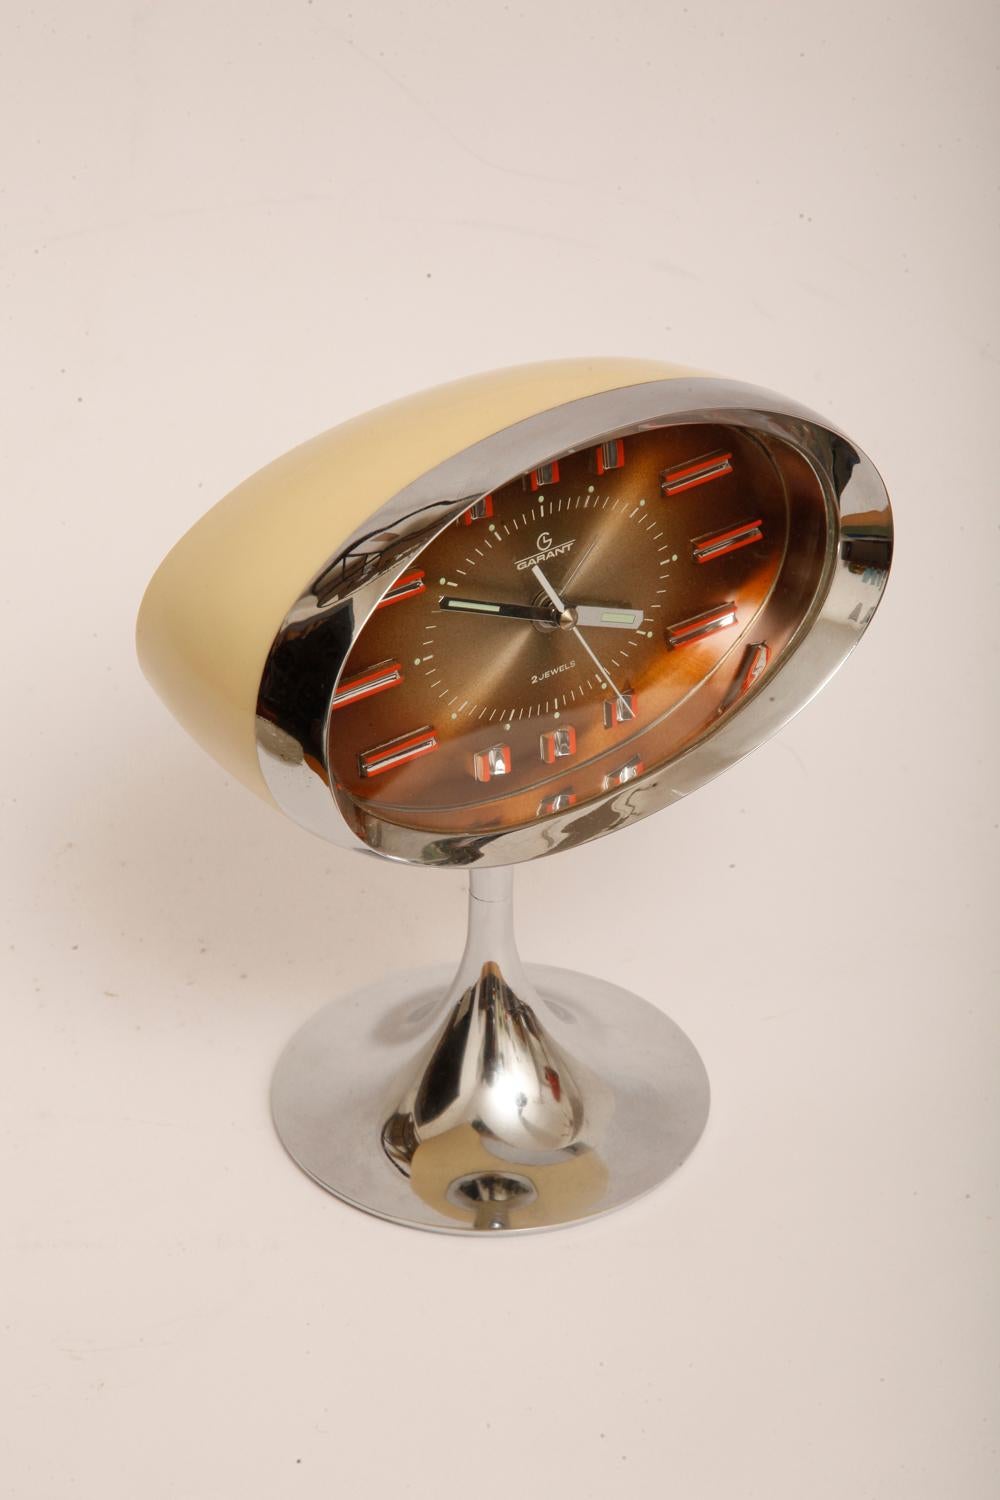 Japanese Space Age Alarm Clock Garant, Plastic and Chromed, 1970s For Sale 2